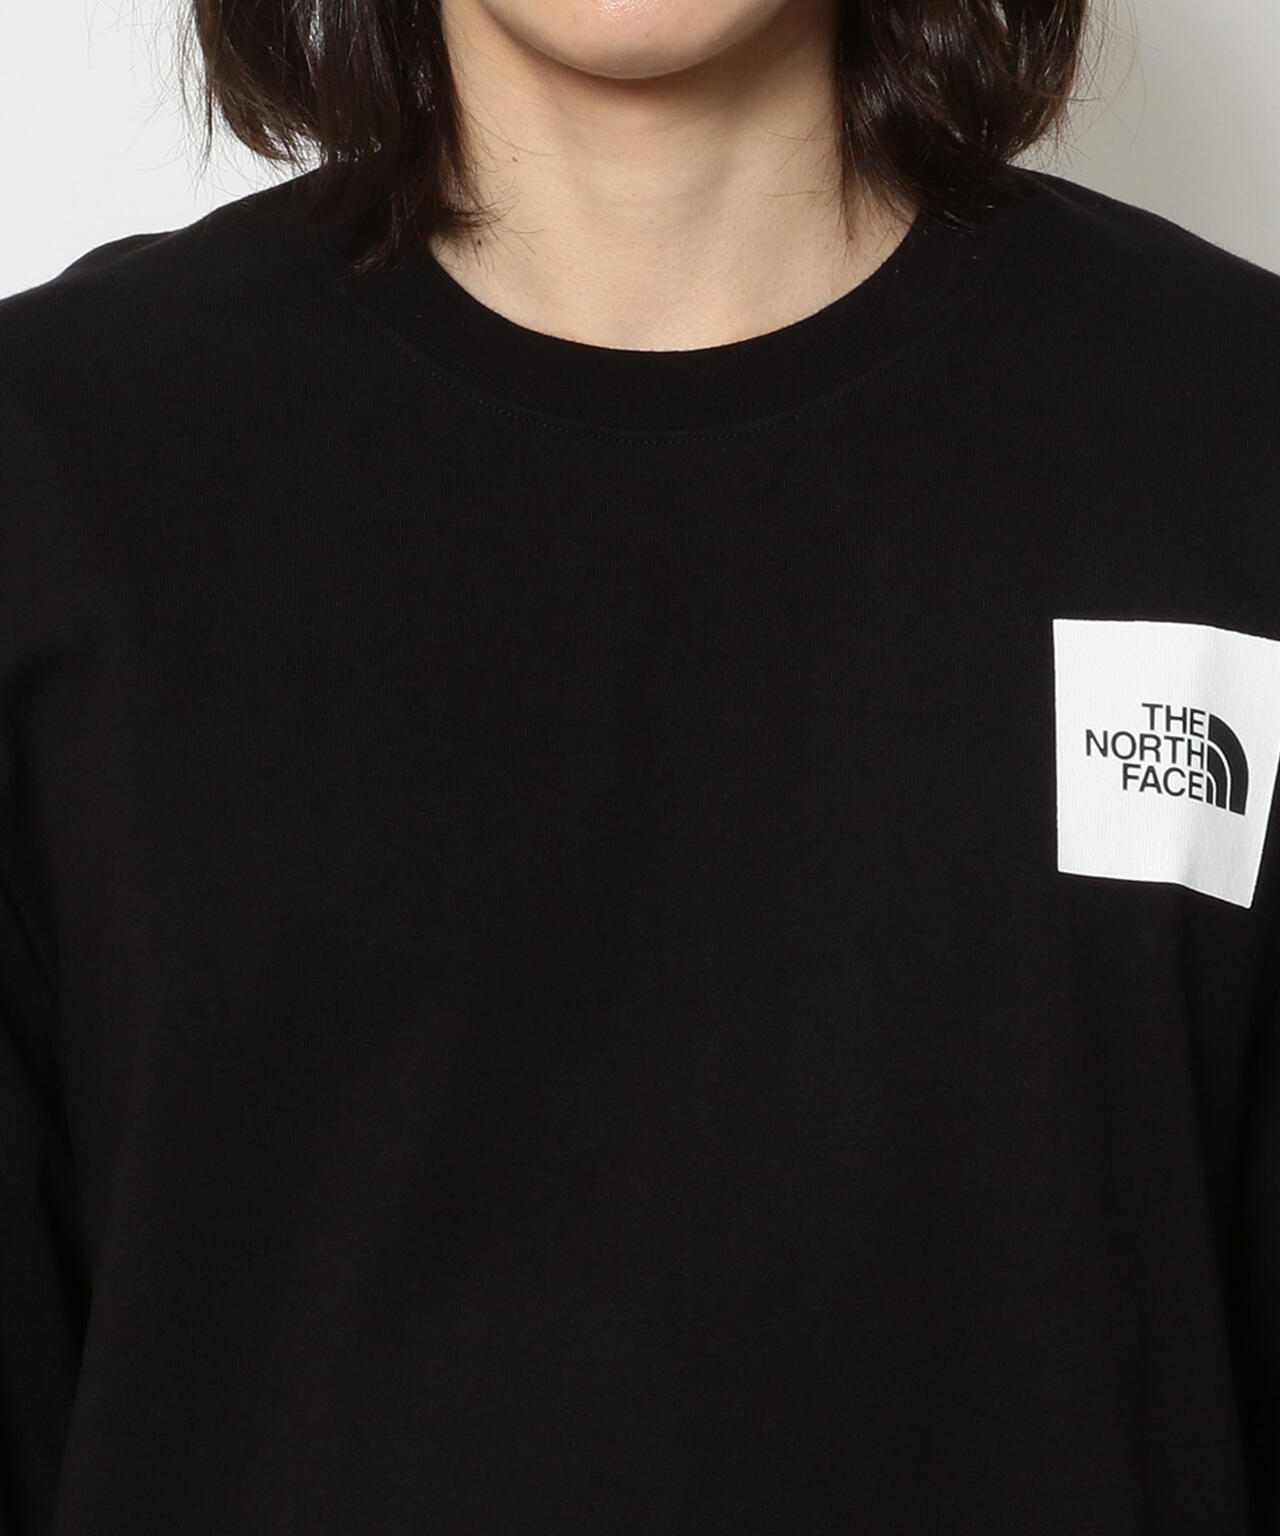 THE NORTH FACE/ザ ノースフェイス/L/S Sleeve Graphic Tee ...